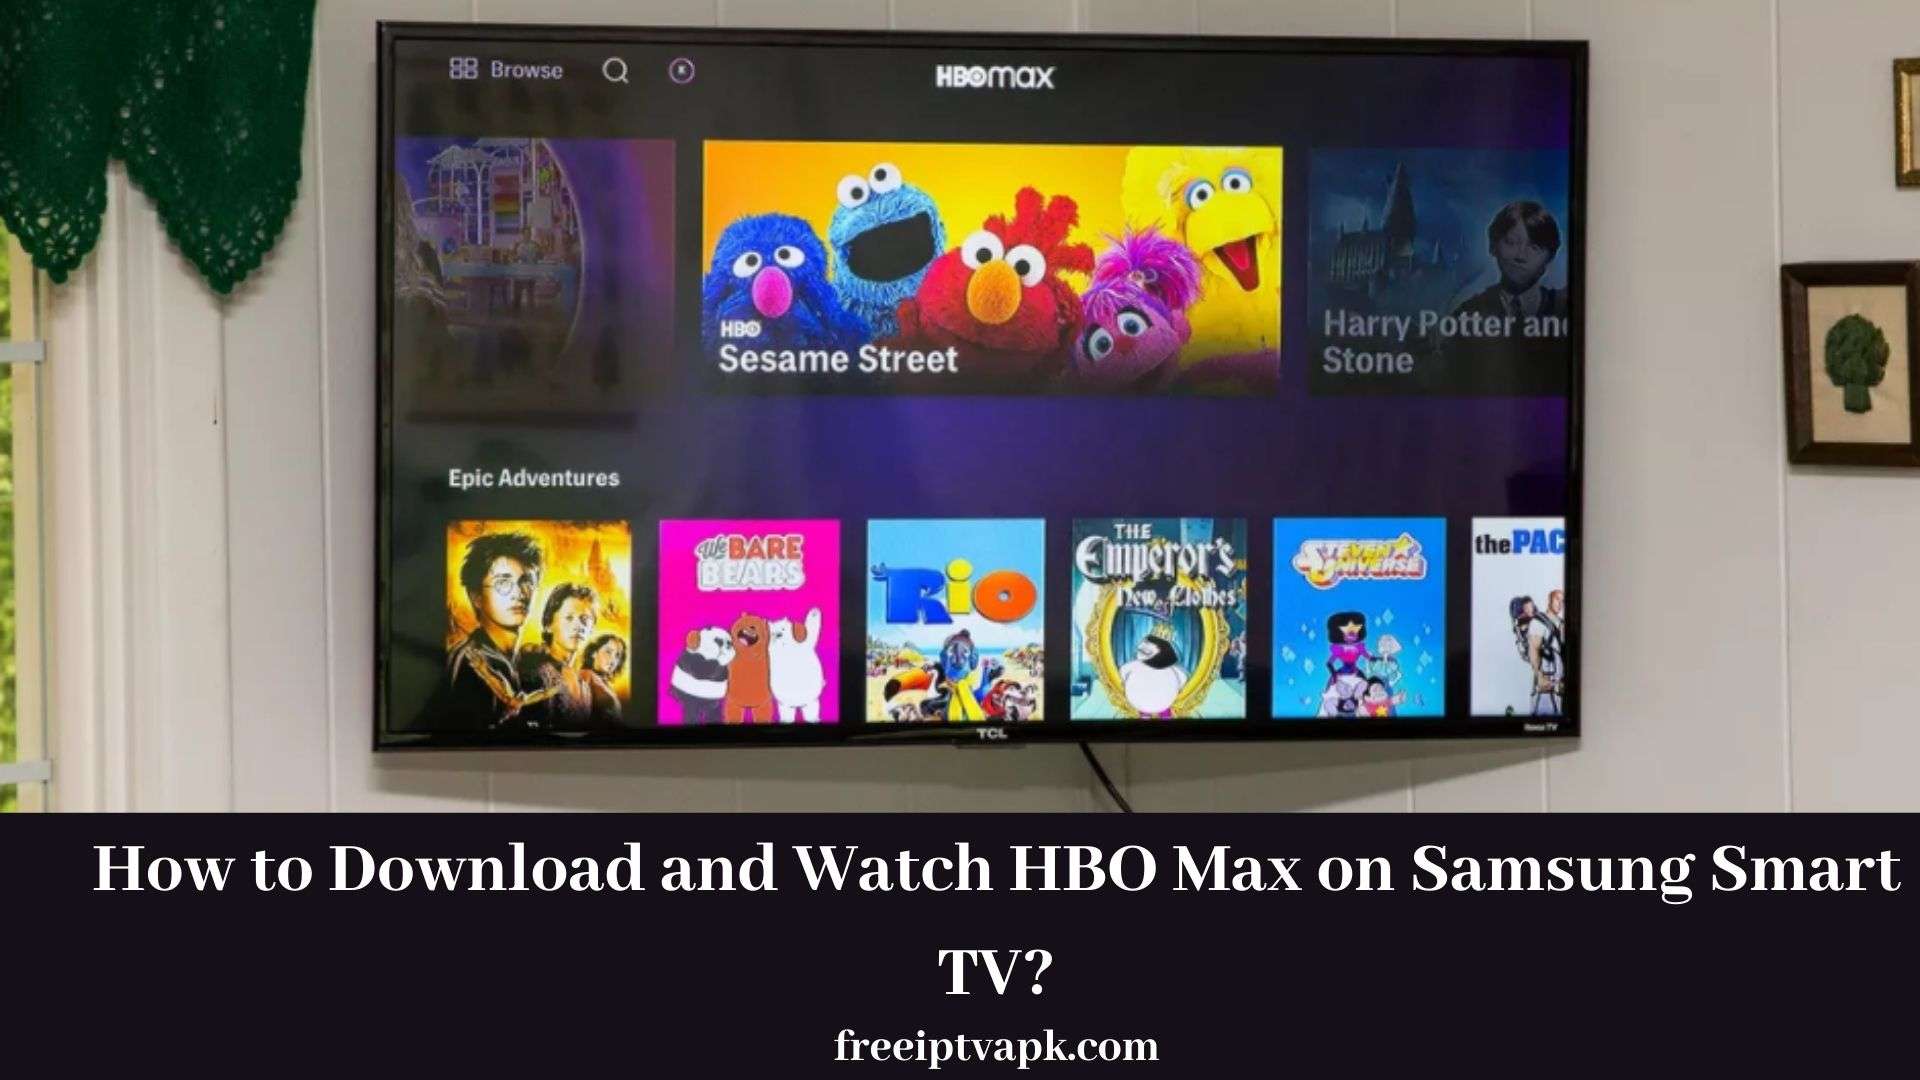 How to Download and Watch HBO Max on Samsung Smart TV?